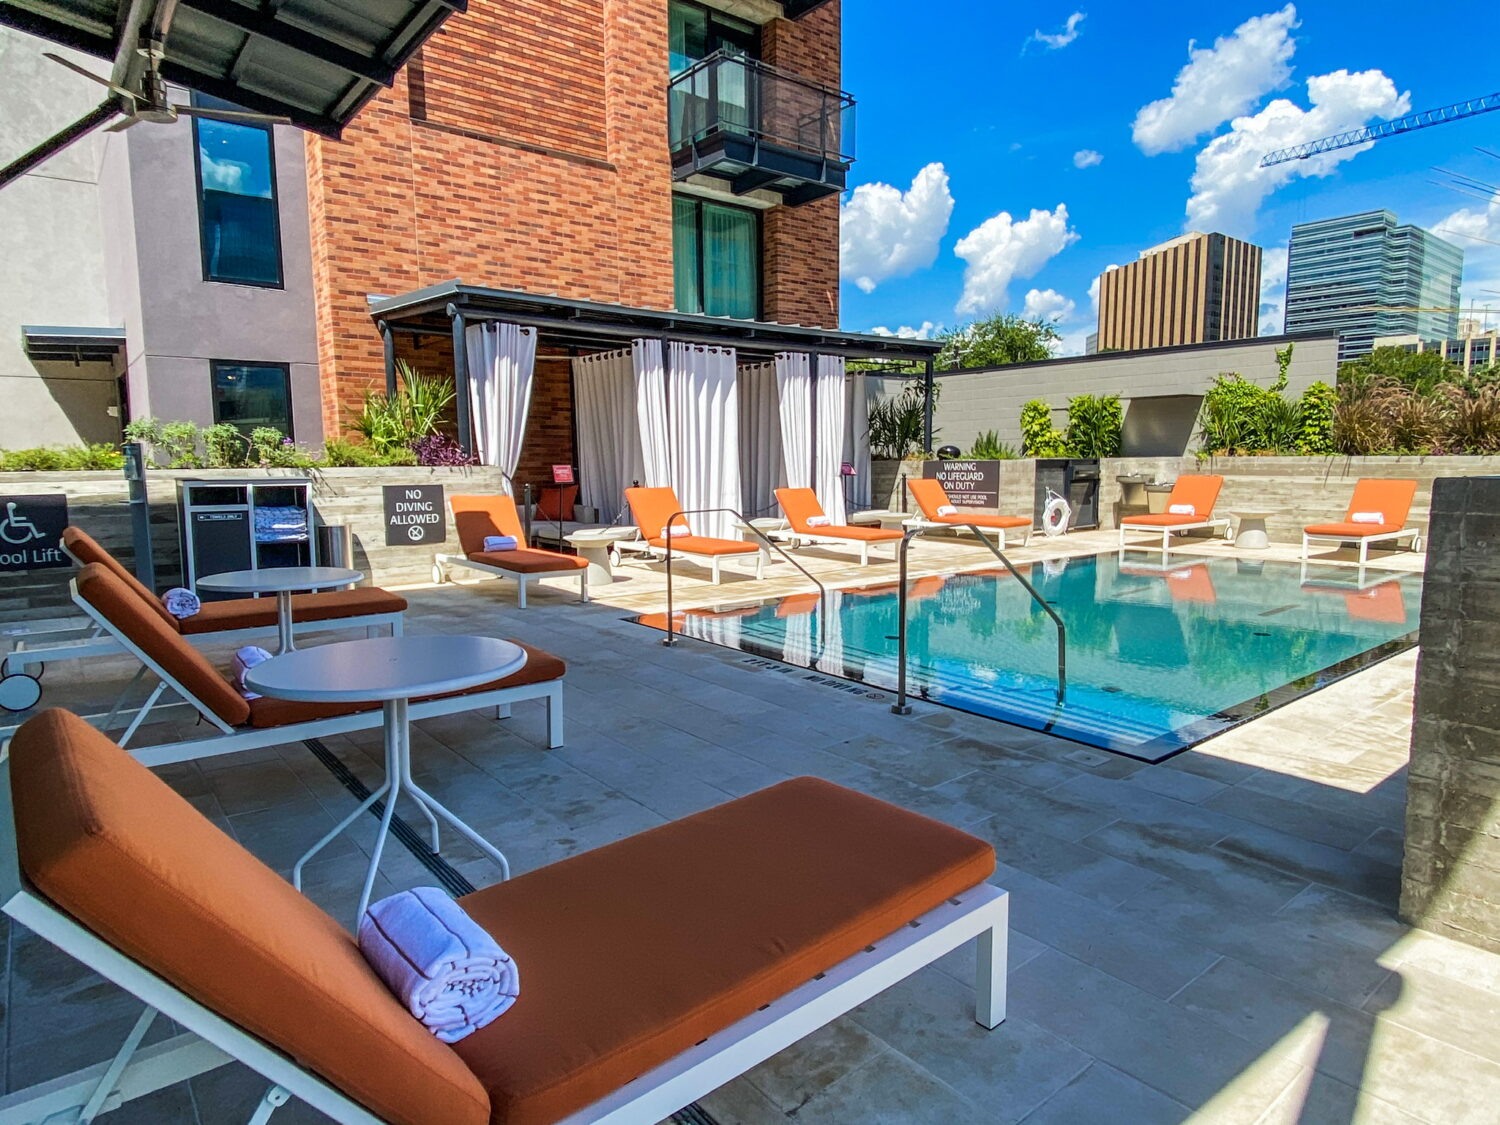 Austin.com Best Hotel Pools in Austin Locals Can Dive Into Without A Room